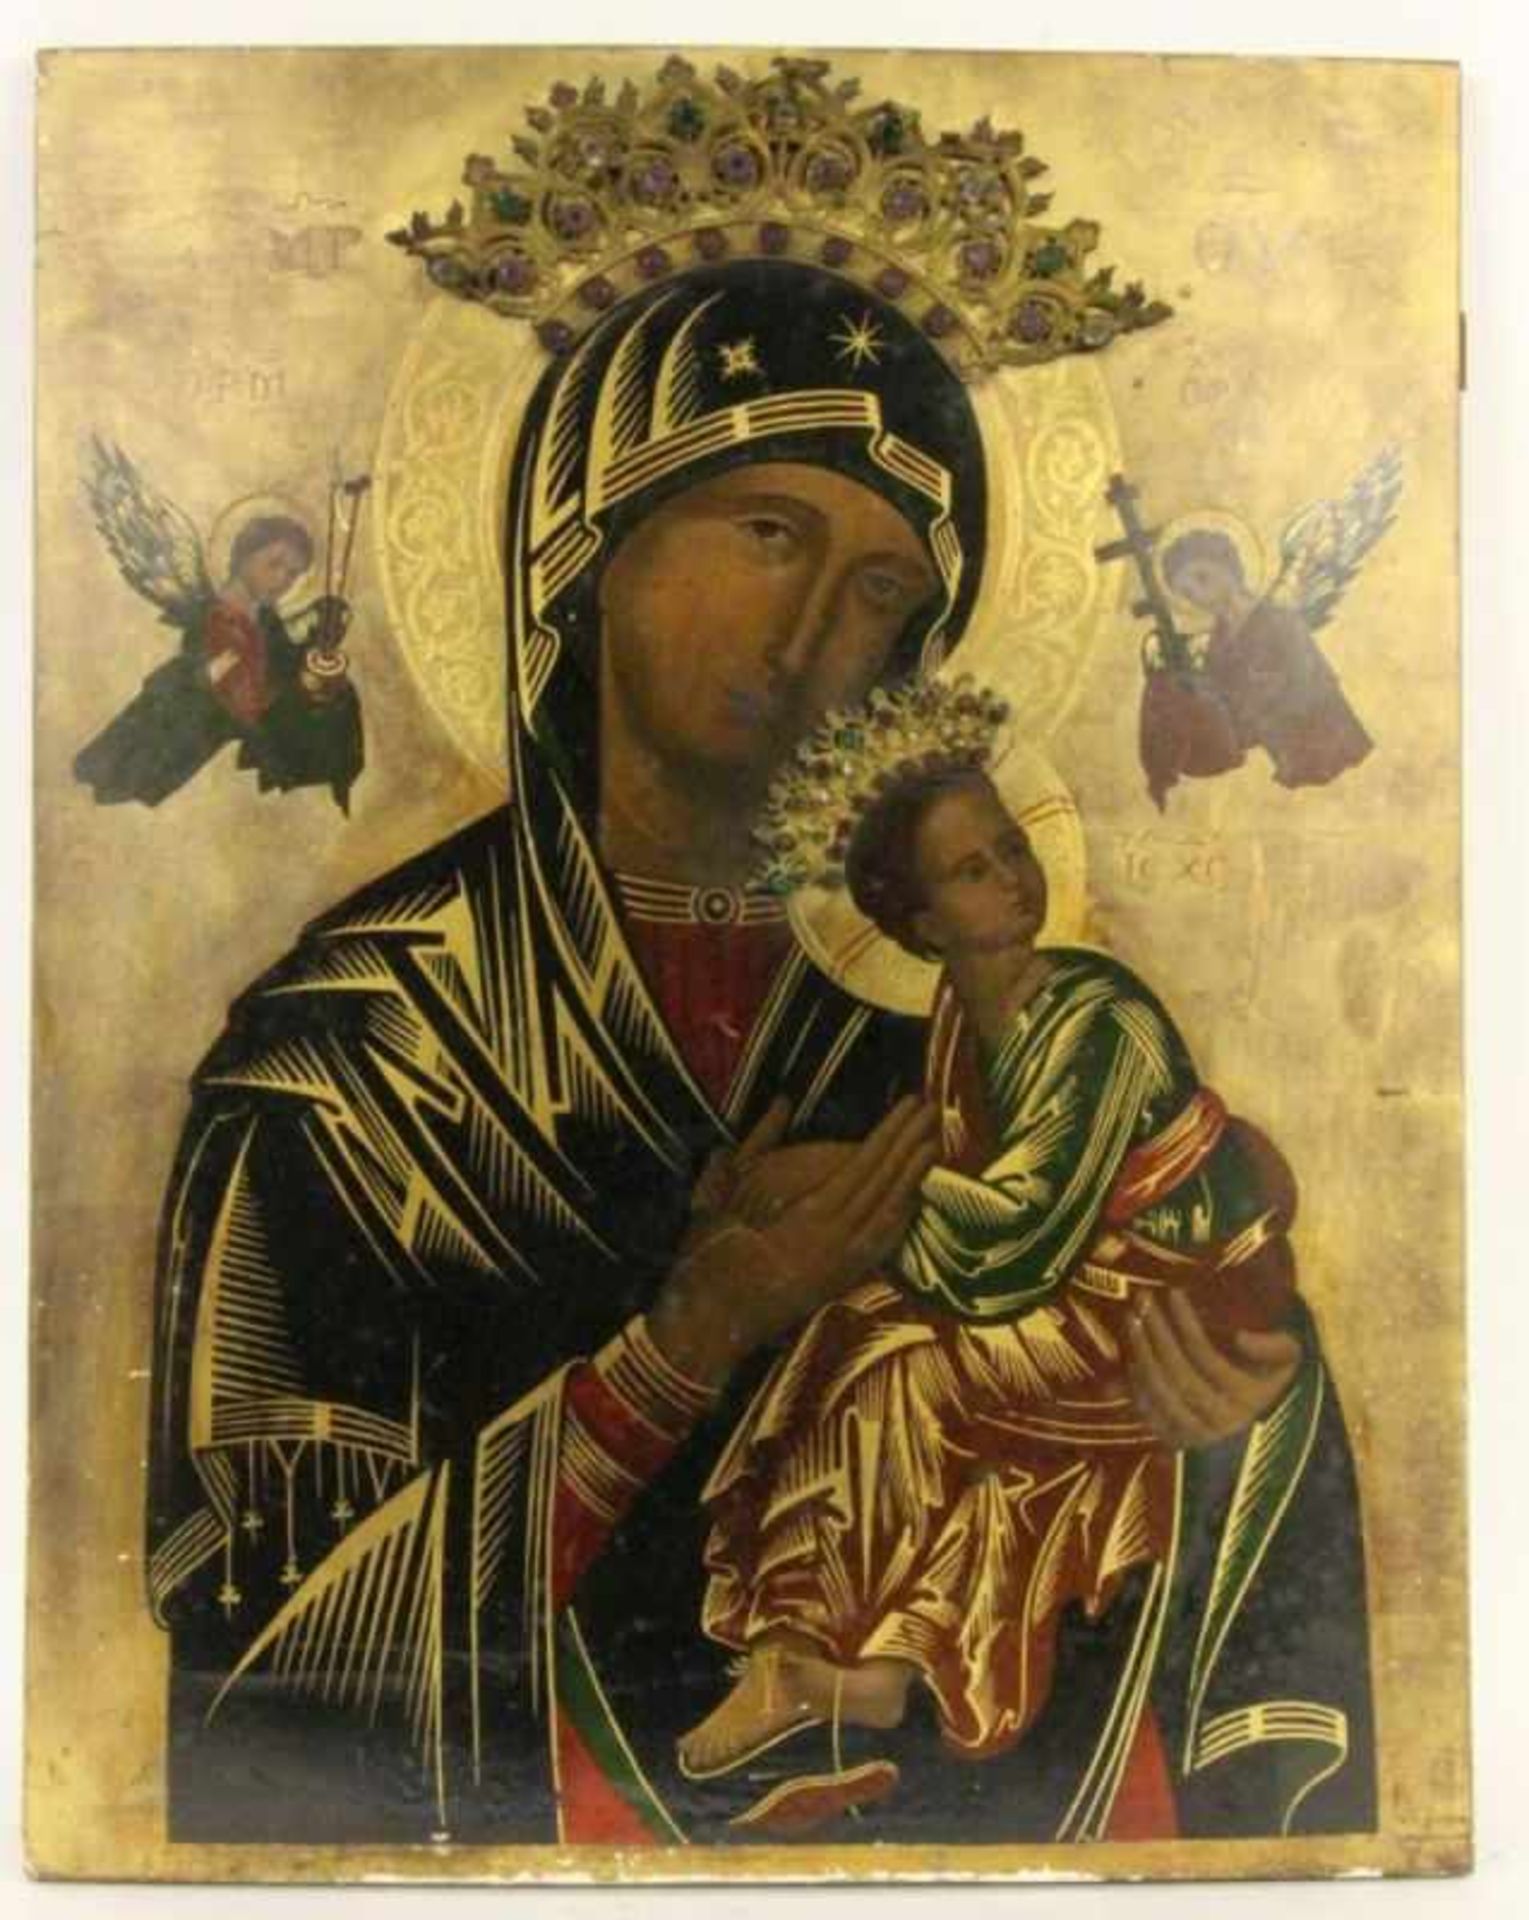 (Referred to as) GIOVANNI BURKHARDT Roma circa 1905 Icon of Mary. Oil on panel, inscribedand dated